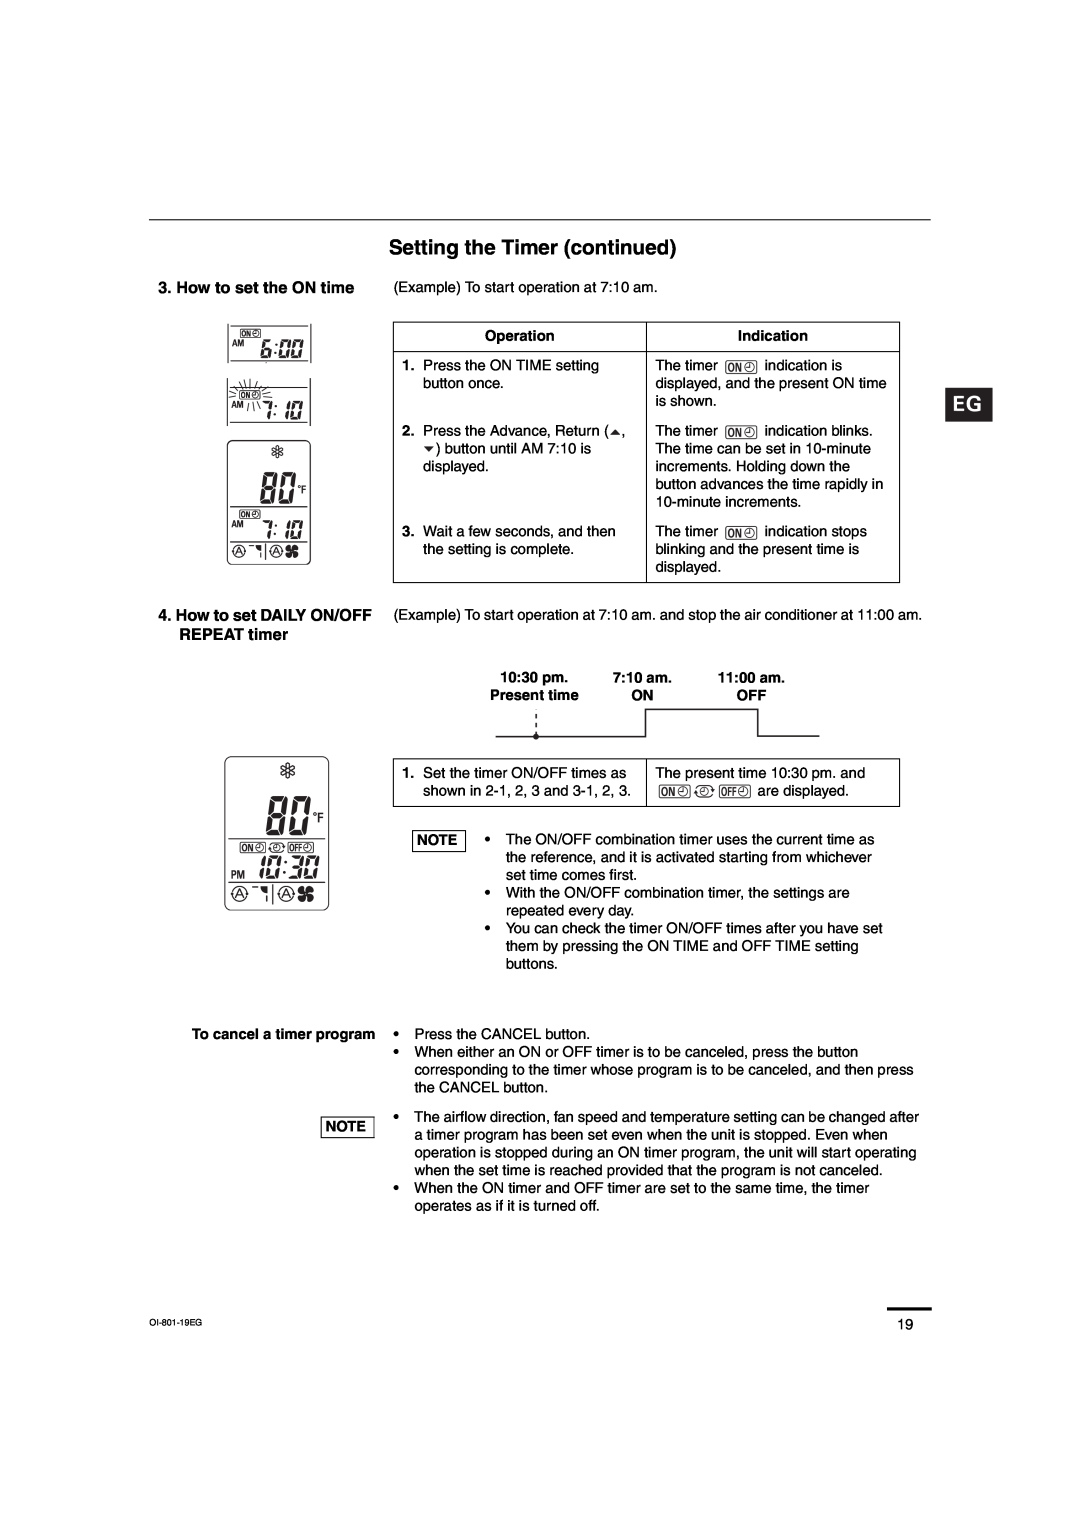 Sanyo CH1872, CH2472 service manual Setting the Timer continued, REPEAT timer 